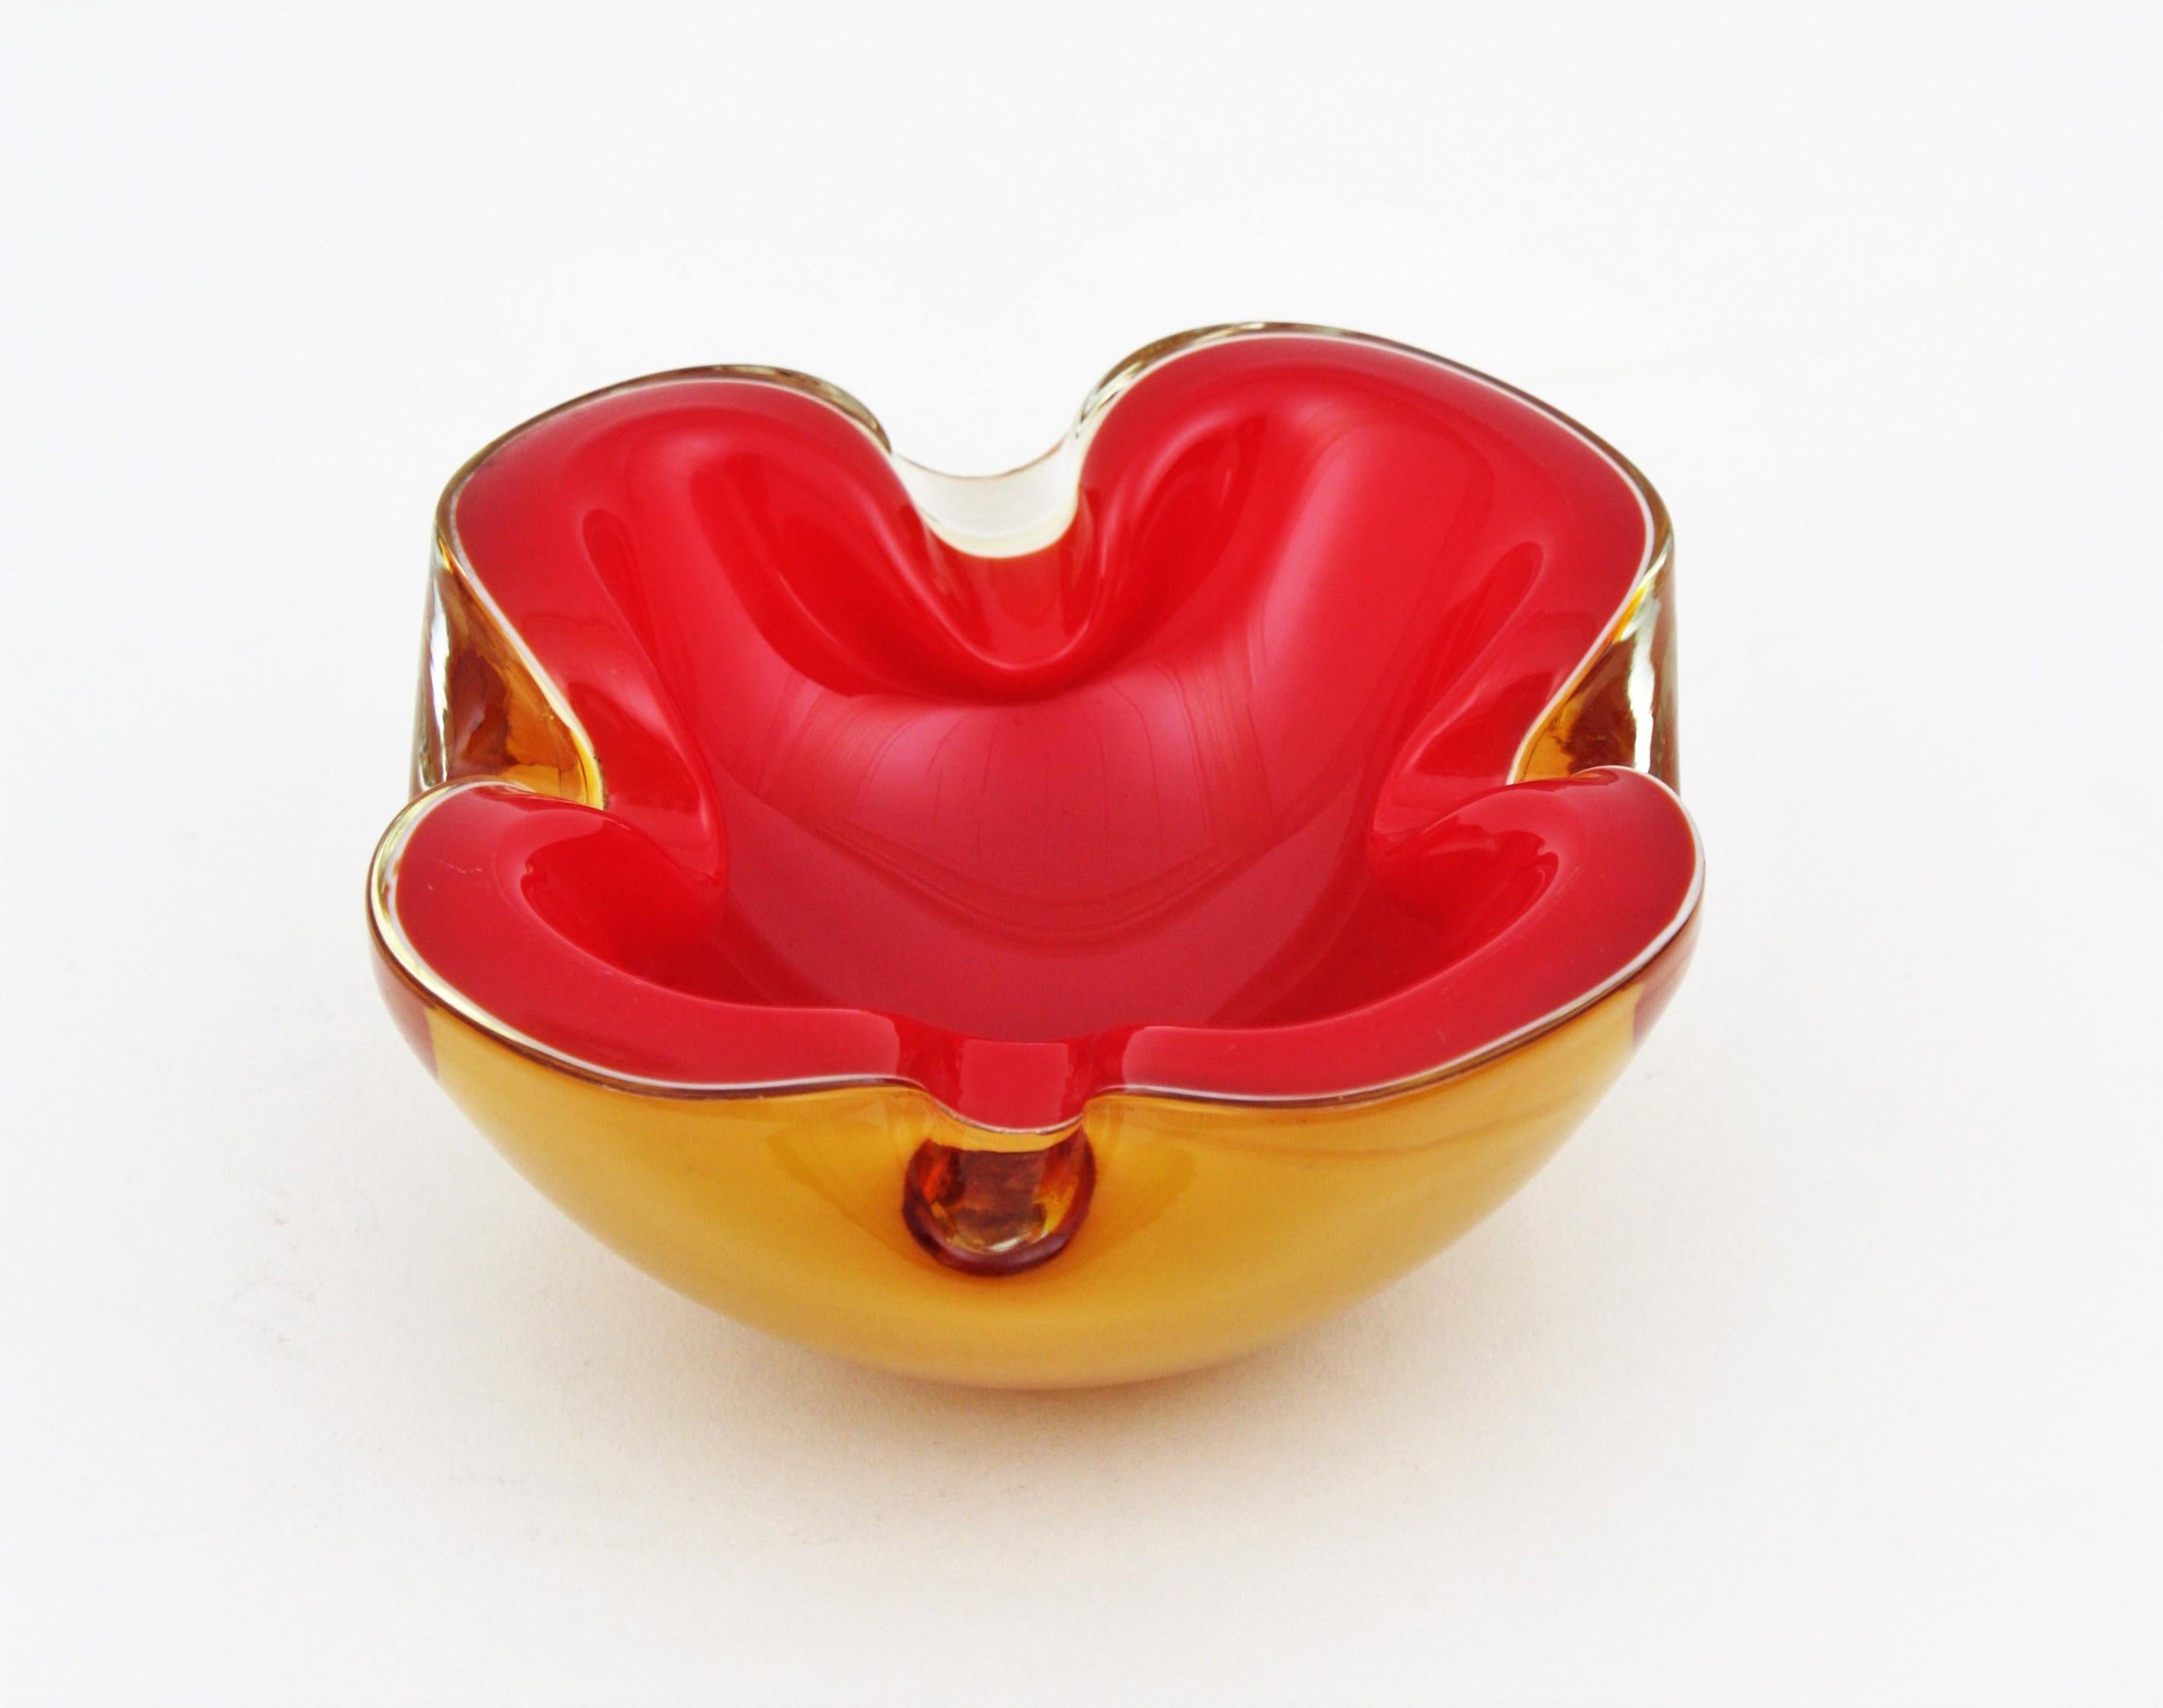 20th Century Mid-Century Modern Italian Red and Amber Sommerso Murano Glass Bowl or Ashtray